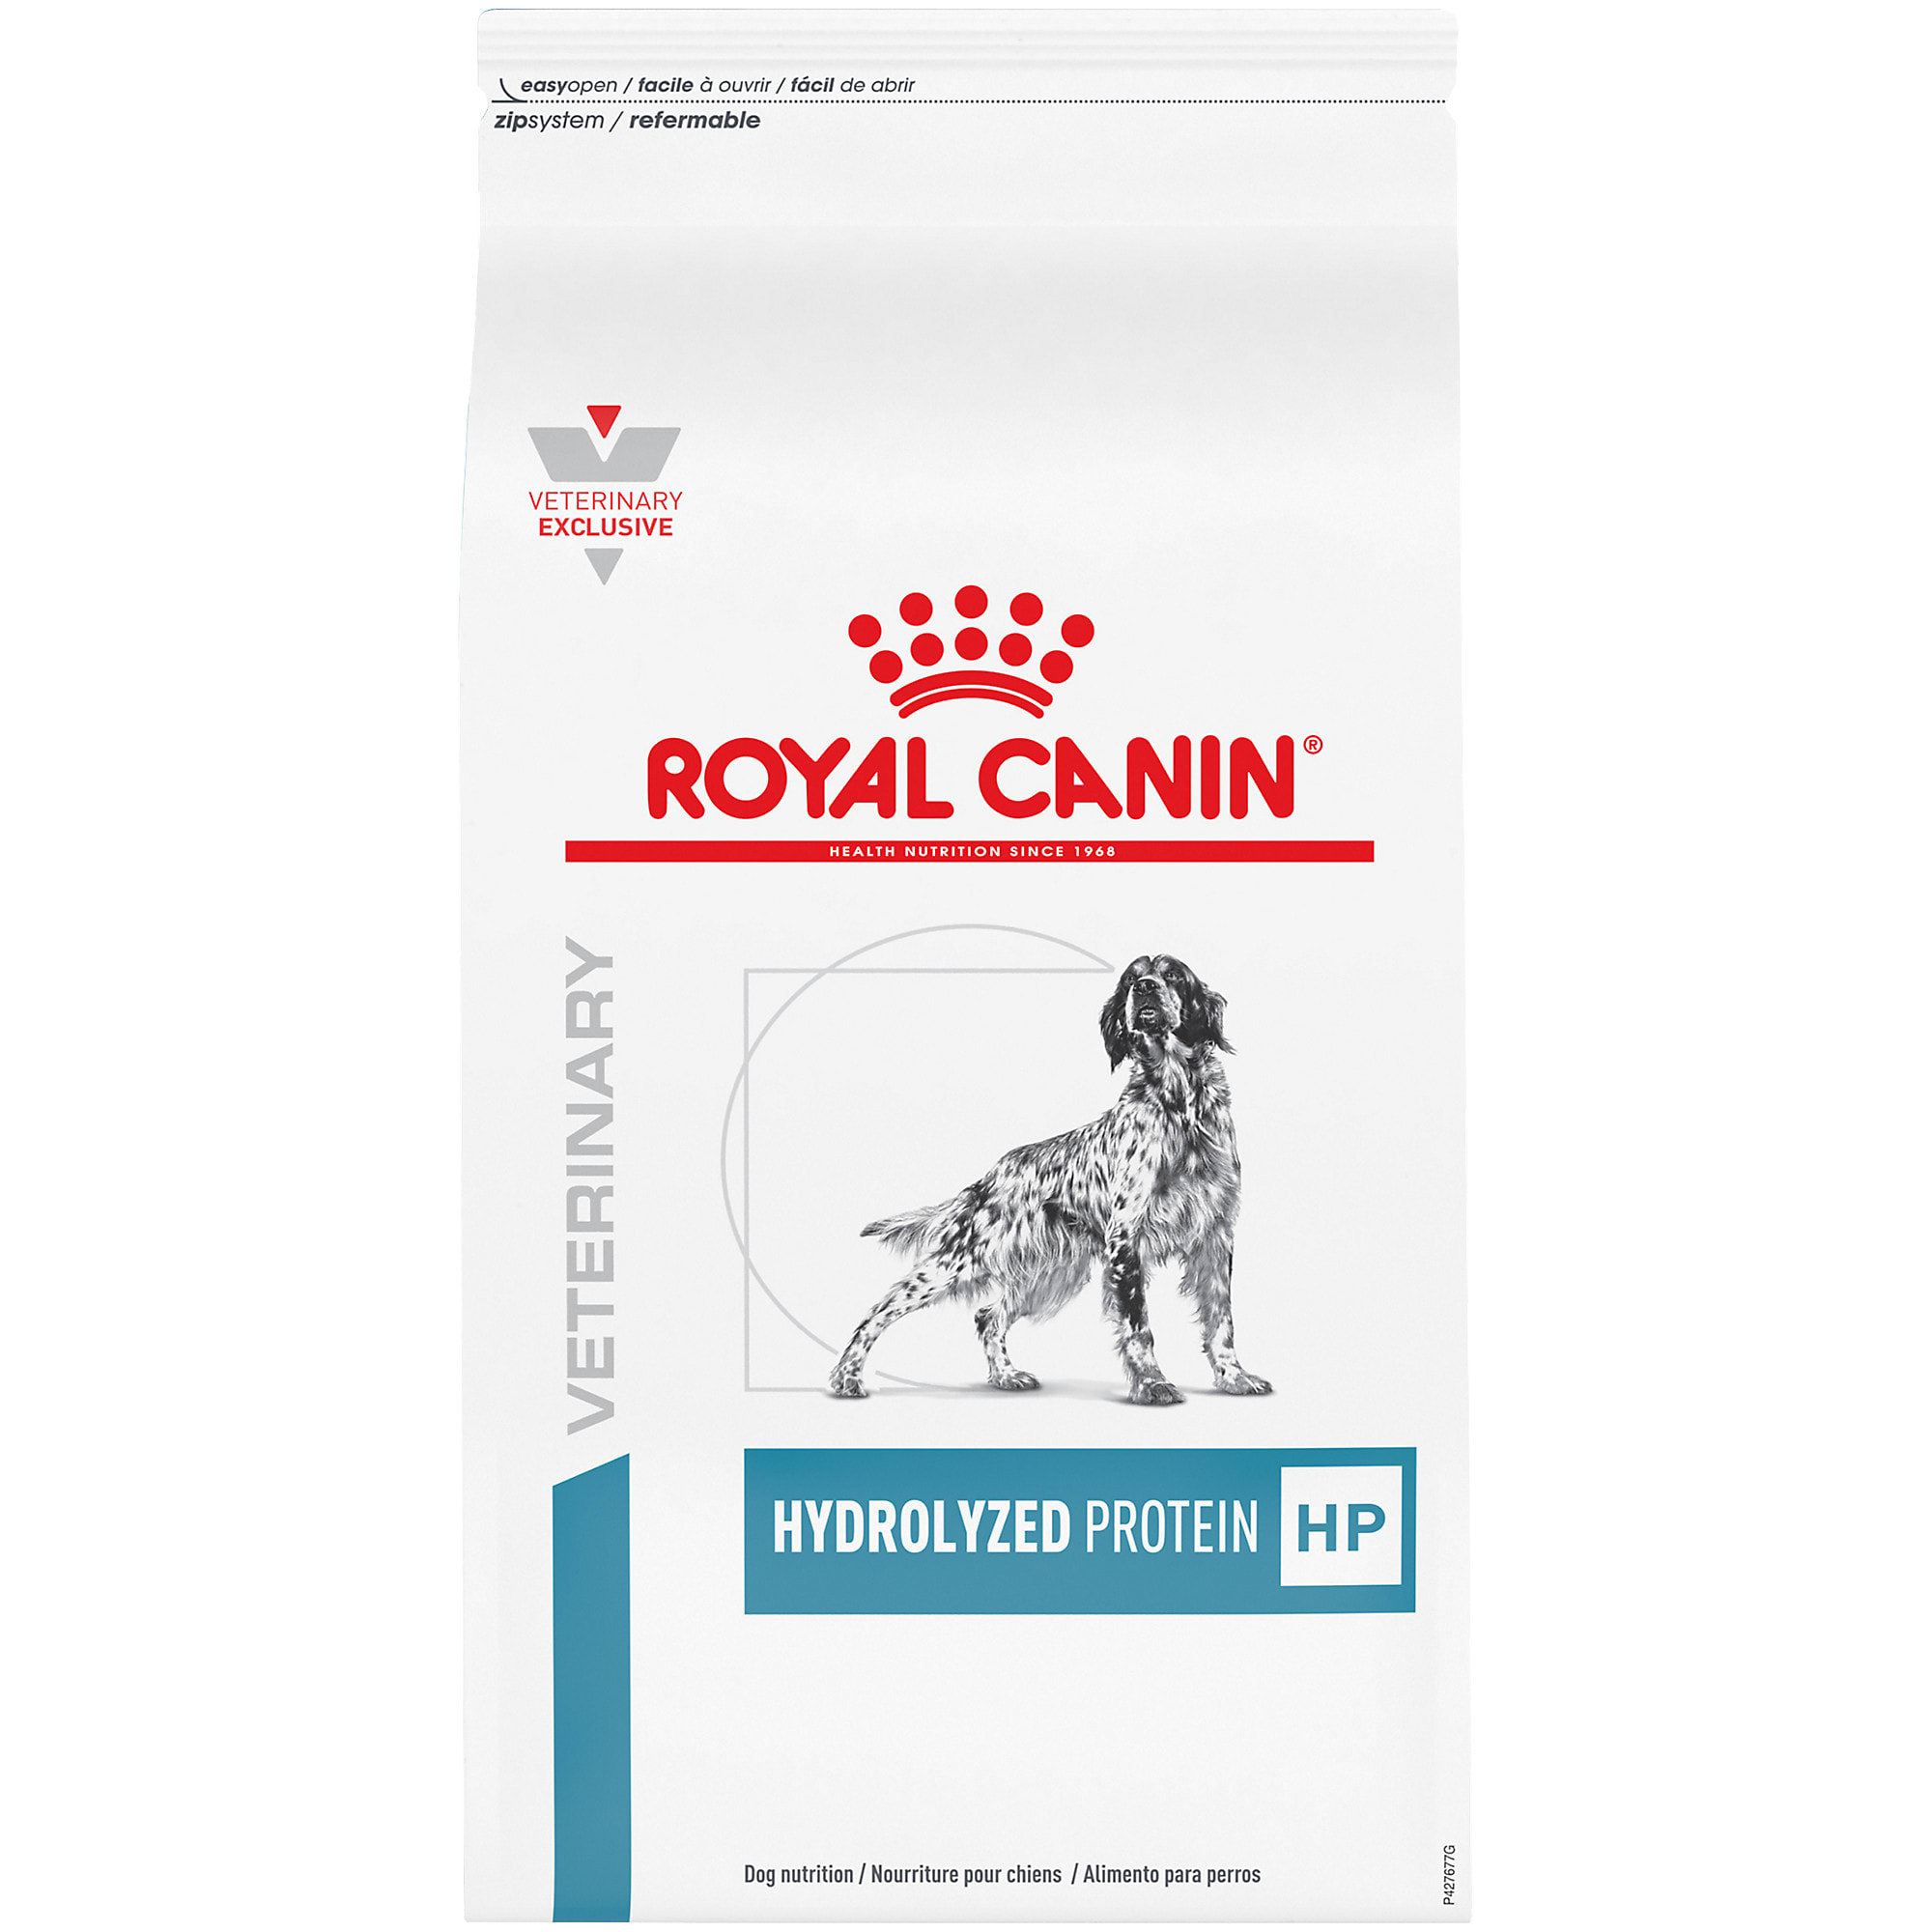 royal canin multifunction urinary and hydrolyzed protein canine canned